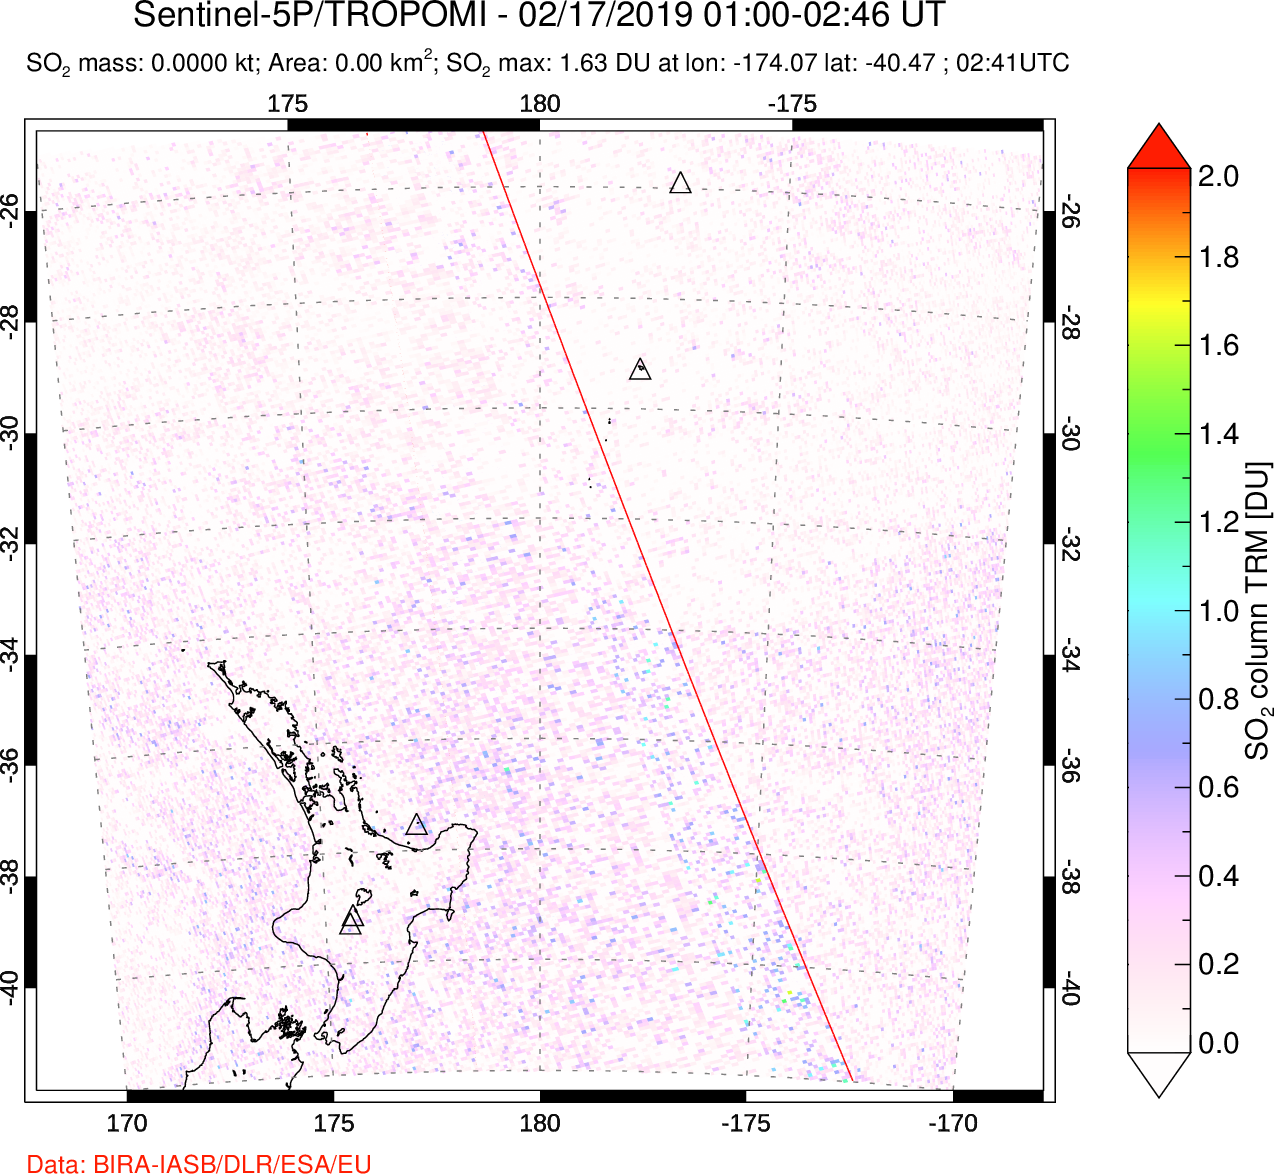 A sulfur dioxide image over New Zealand on Feb 17, 2019.